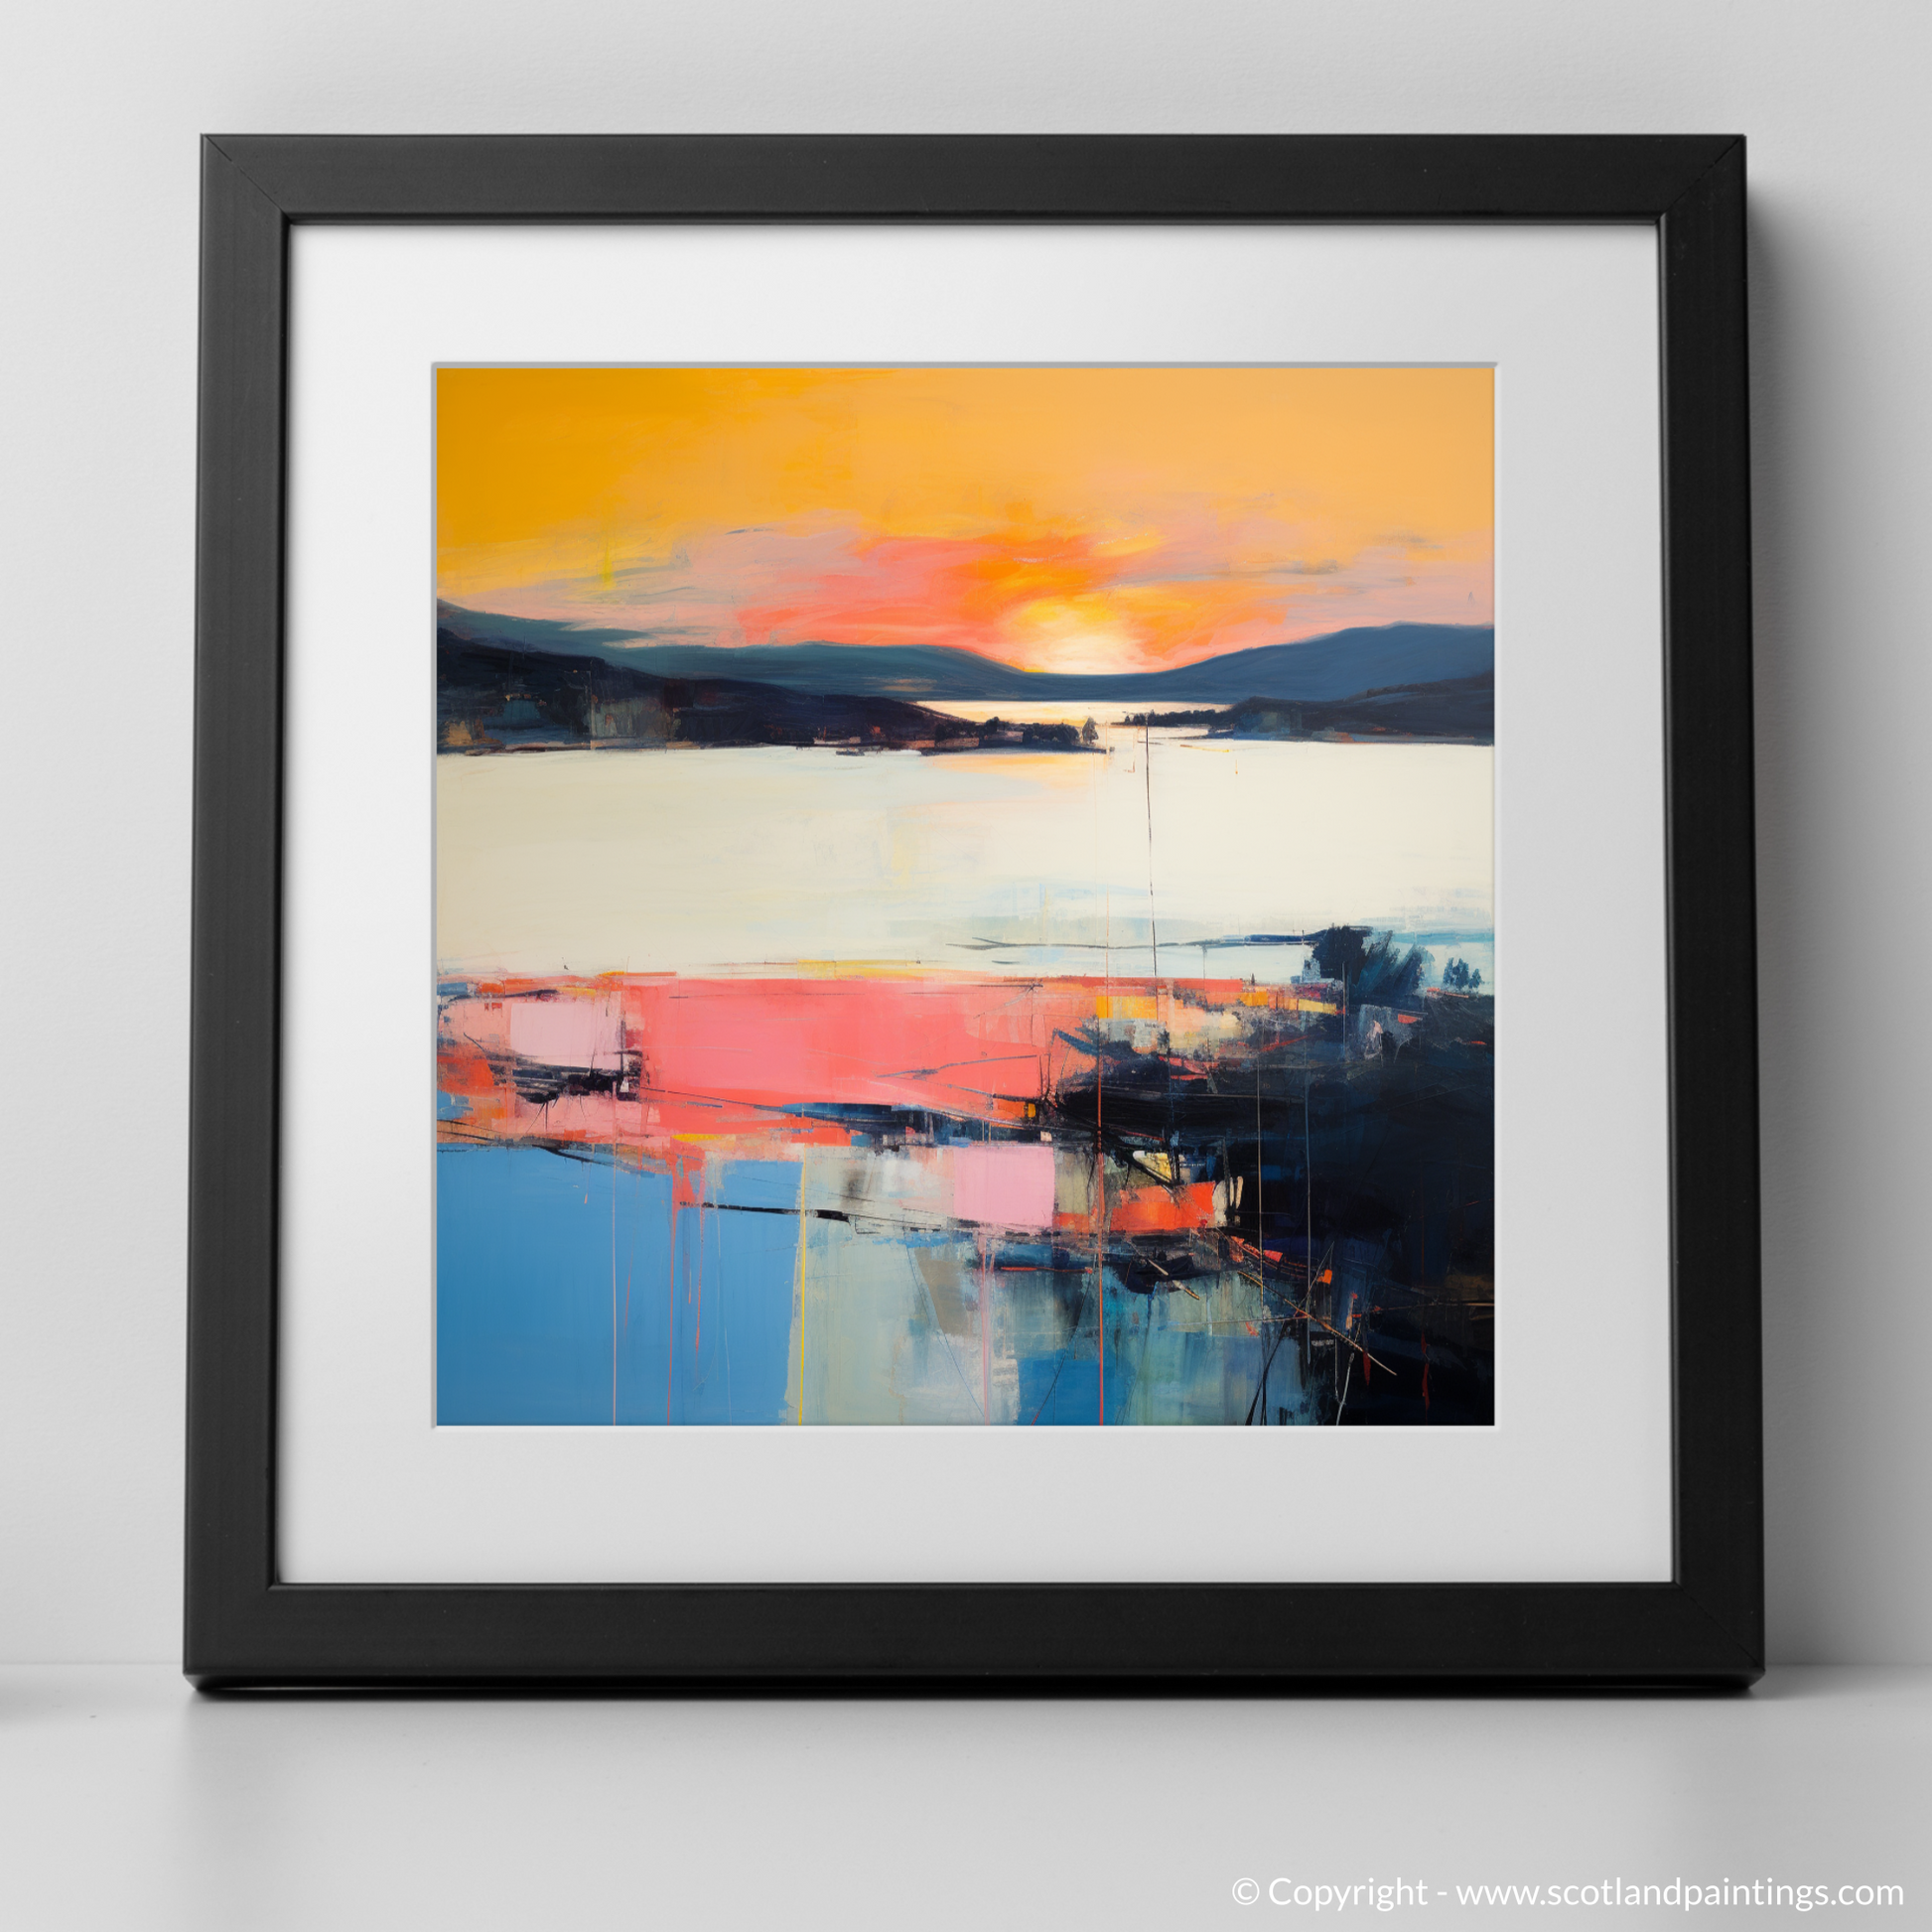 Art Print of Sunset over Loch Lomond with a black frame